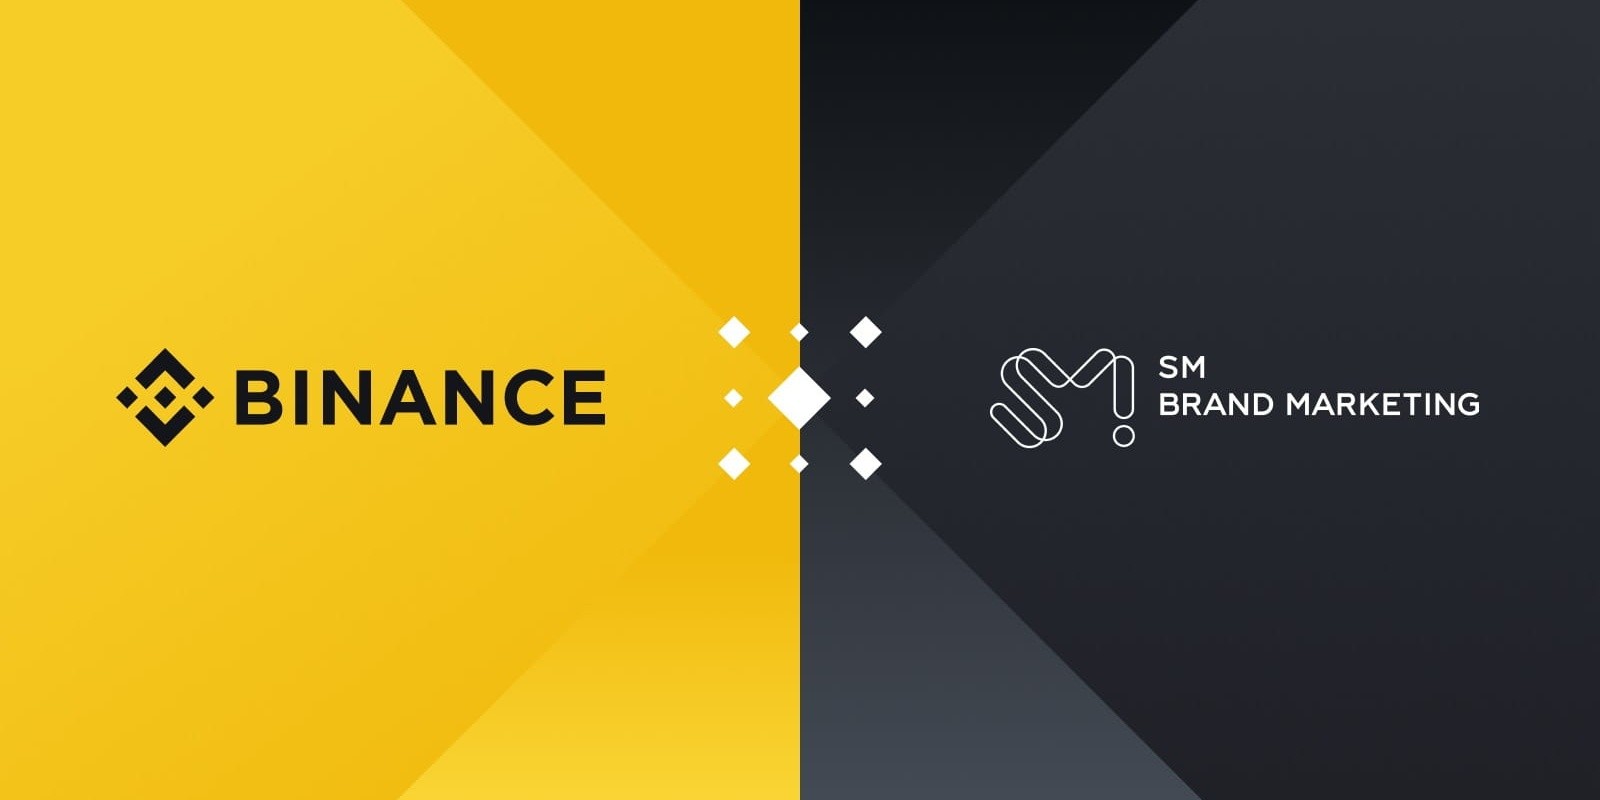 SM Entertainment partners with Binance to launch global play-to-create NFT ecosystem